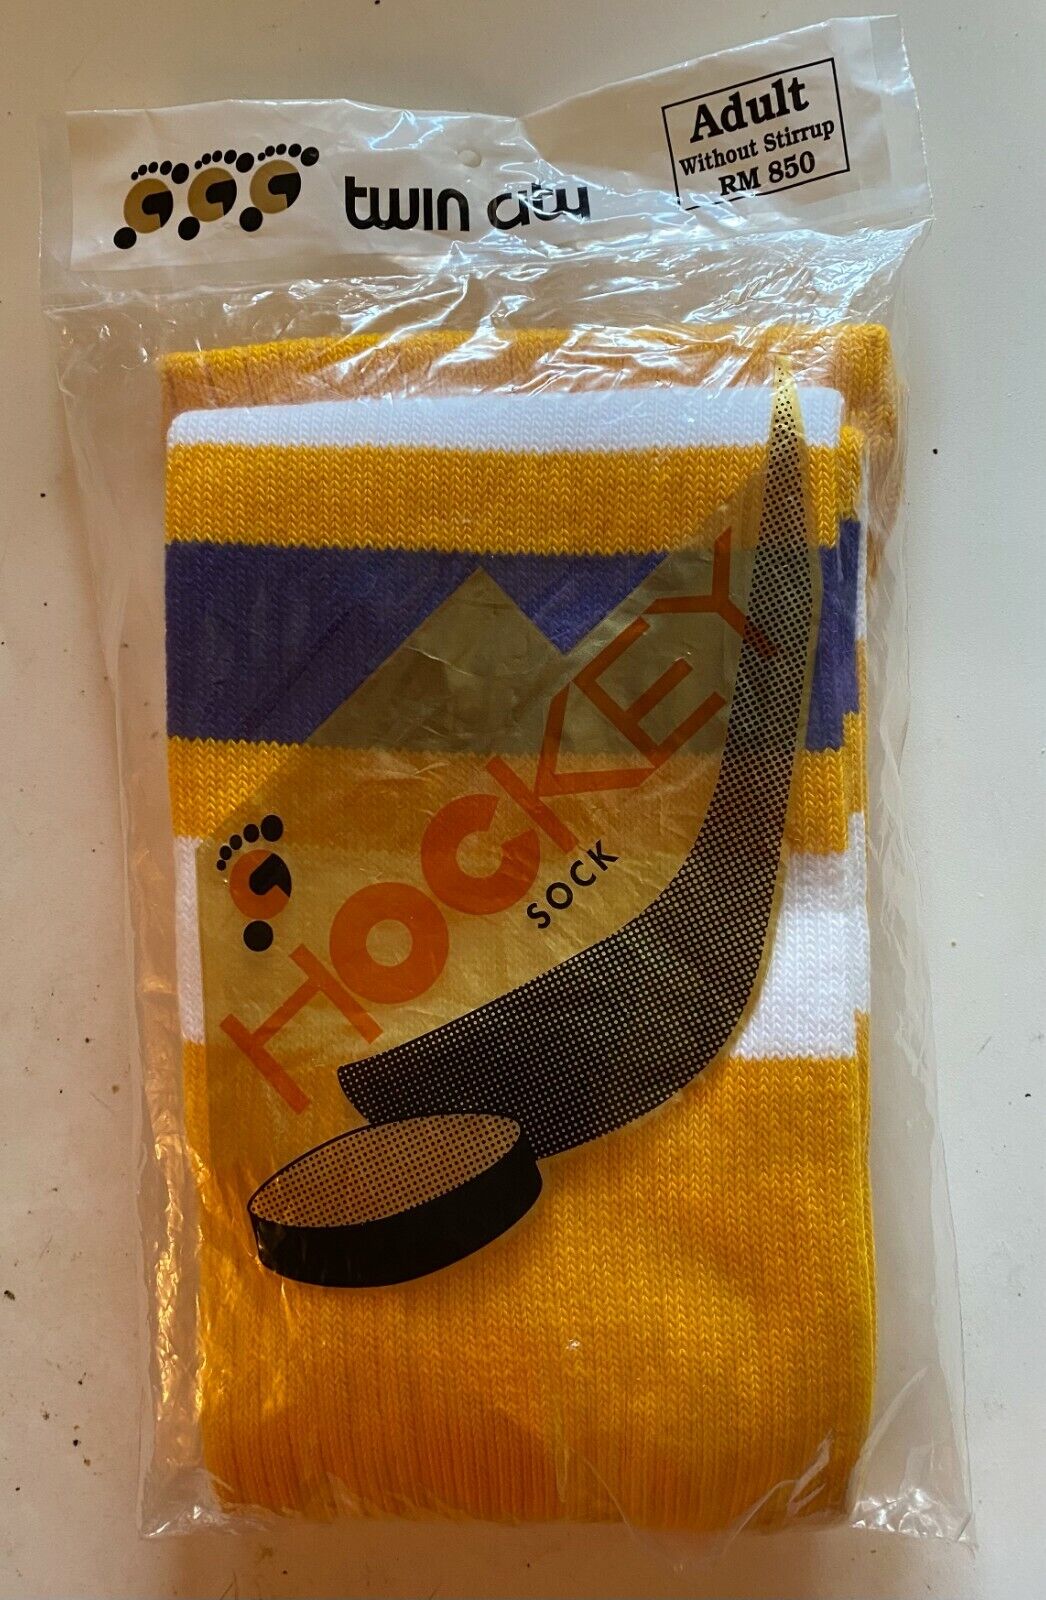 Twin City Hockey Sock Adult Without Stirrup Rm 850